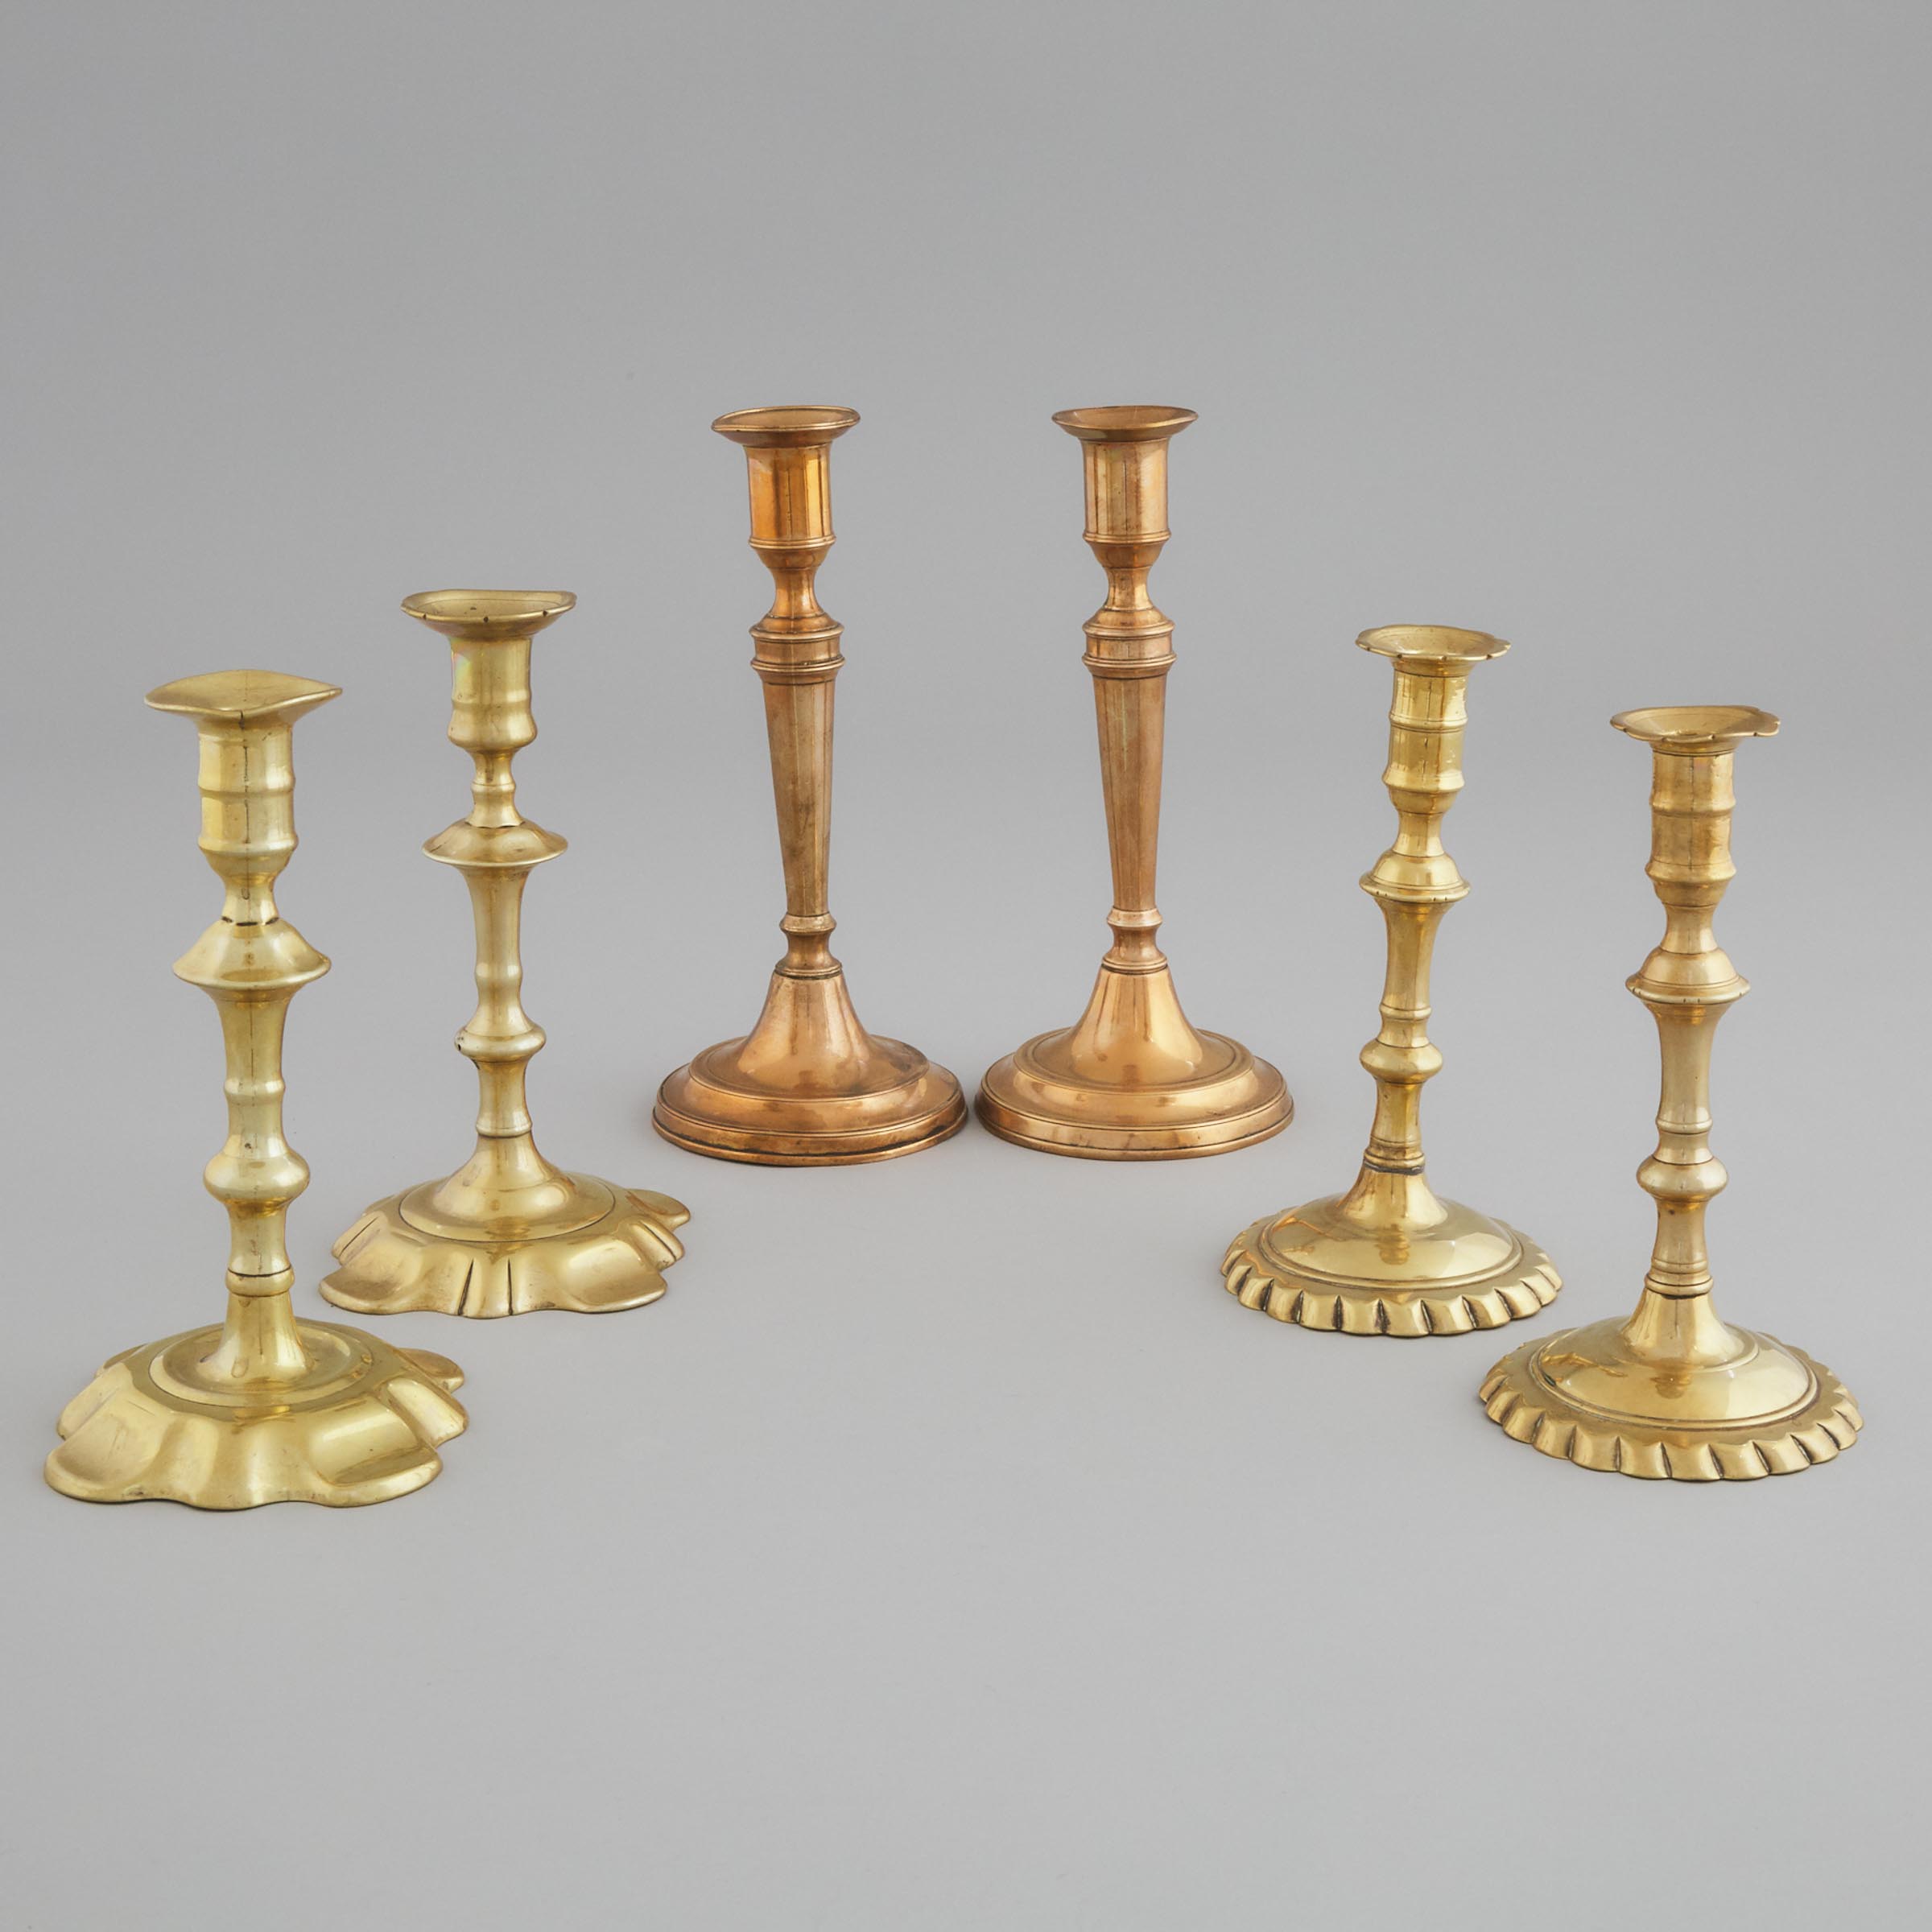 Three Pairs of English Brass or Copper Candlesticks, mid 18th-early 19th centuries